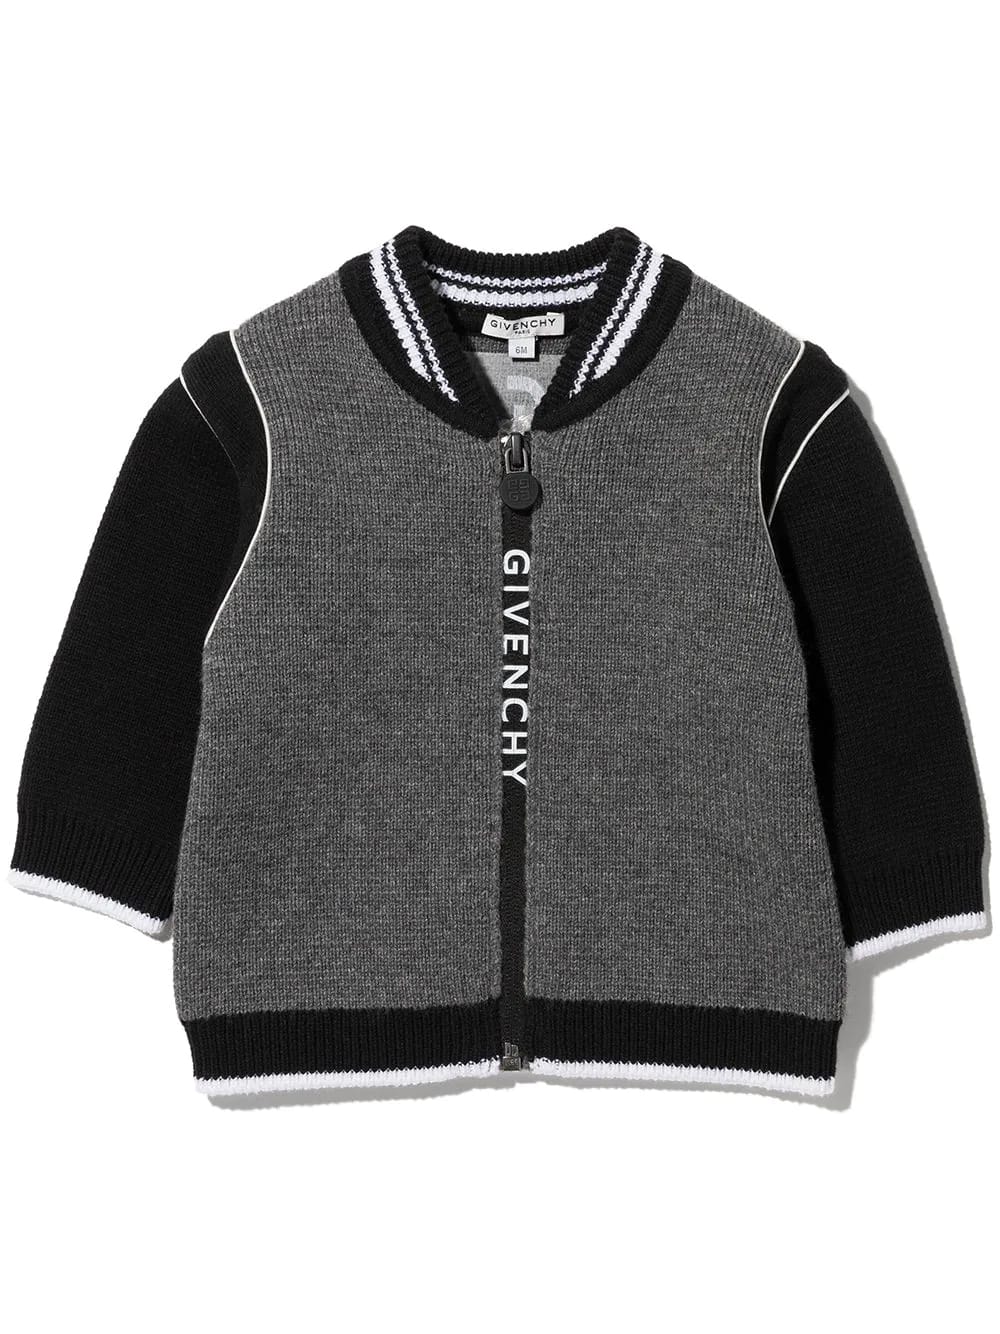 Givenchy Kids Grey And Black Cardigan With Front And Back Logo